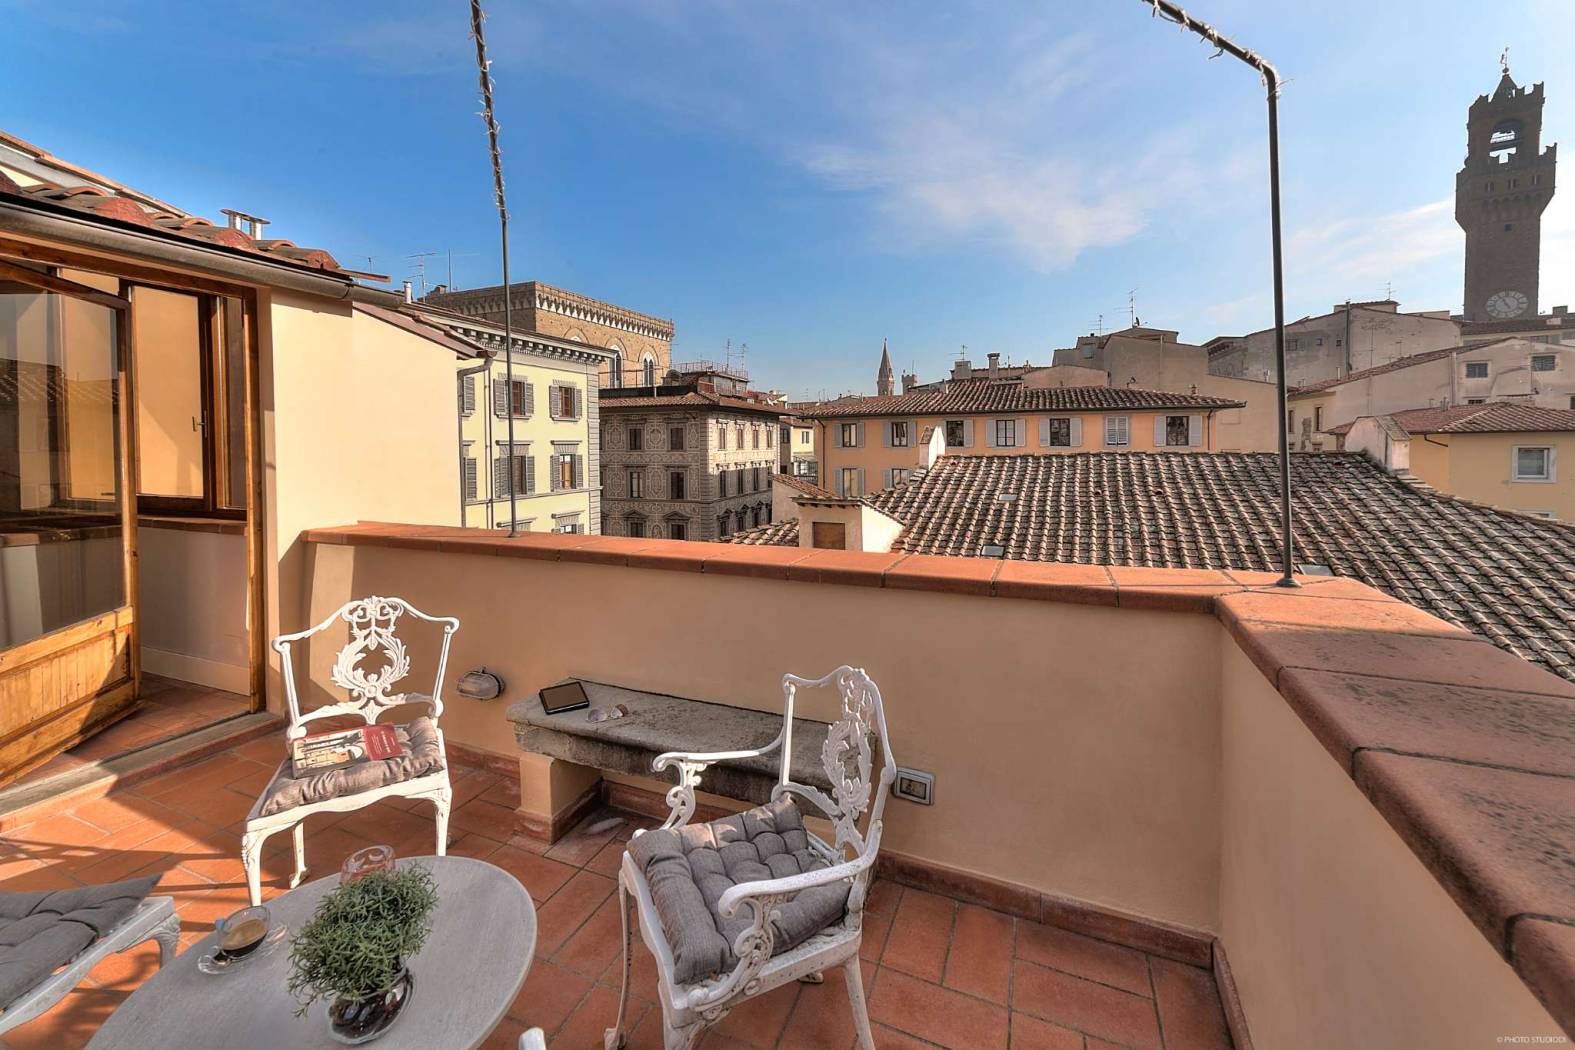 Rif: af000vdl2 - FREE FROM NOW. Central very close to Piazza della Repubblica, part of a modernly renovated ancient building, we rent a lovely 